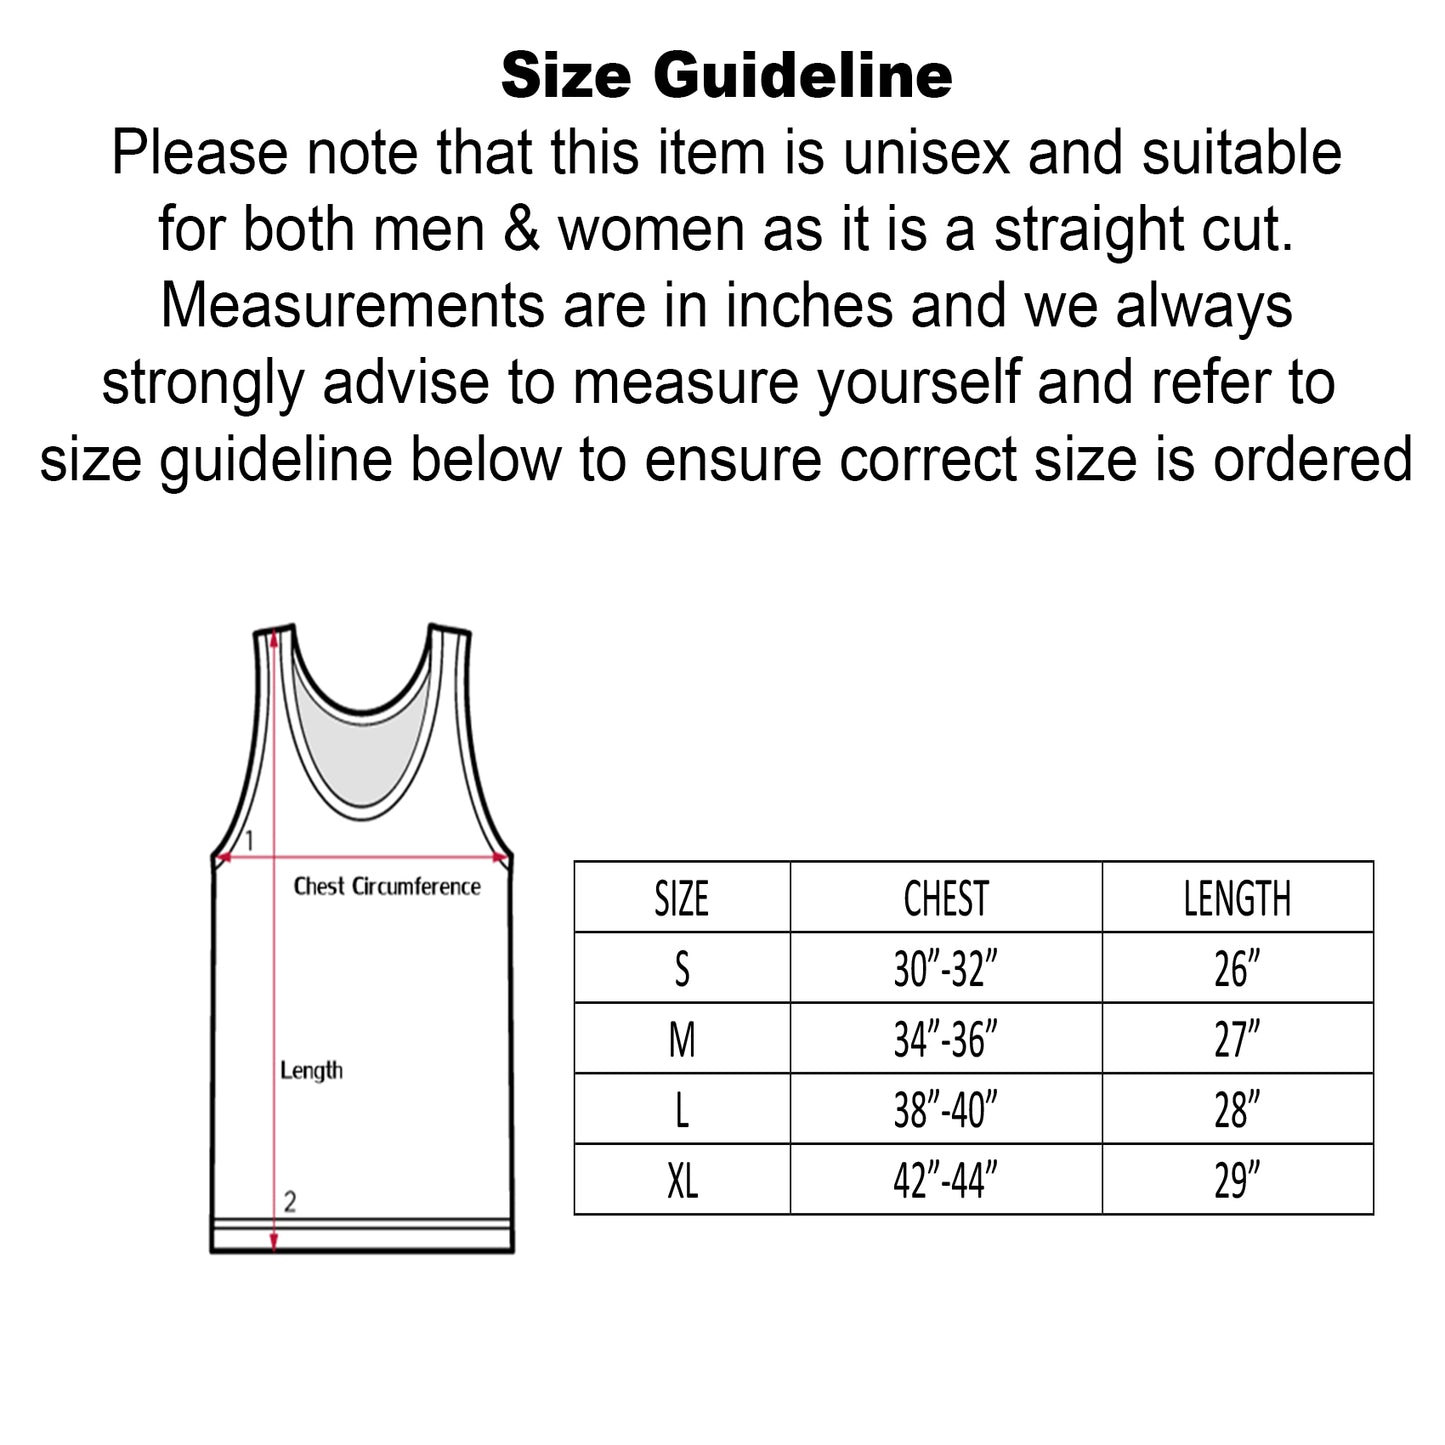 Unisex Red Hot Chili Peppers Tank-Top Singlet vest Sleeveless T-shirt